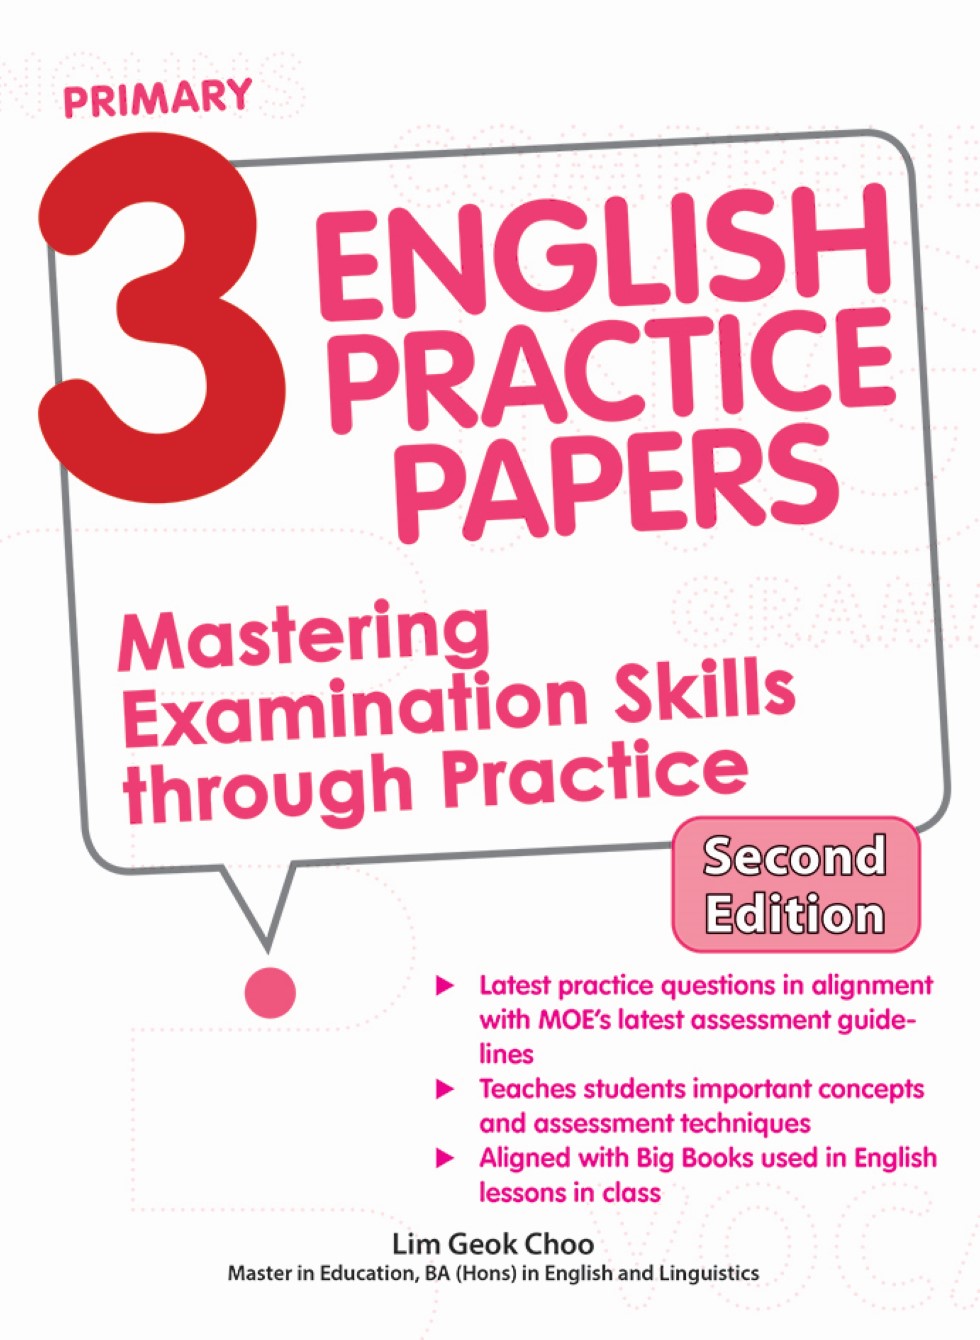 Pte　Services　Second　Edition　Education　English　Singapore　Ltd　Papers　Practice　Primary　CPD